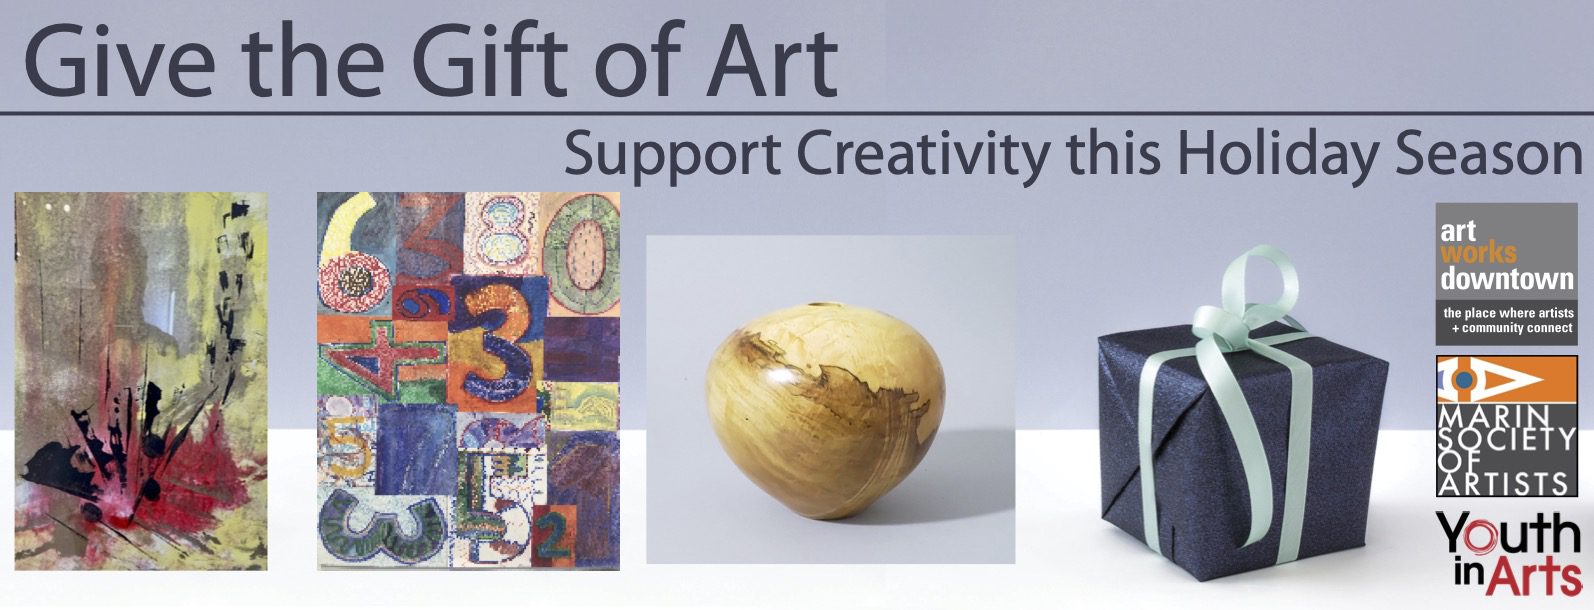 Give the Gift of Art: Support Creativity this Holiday Season